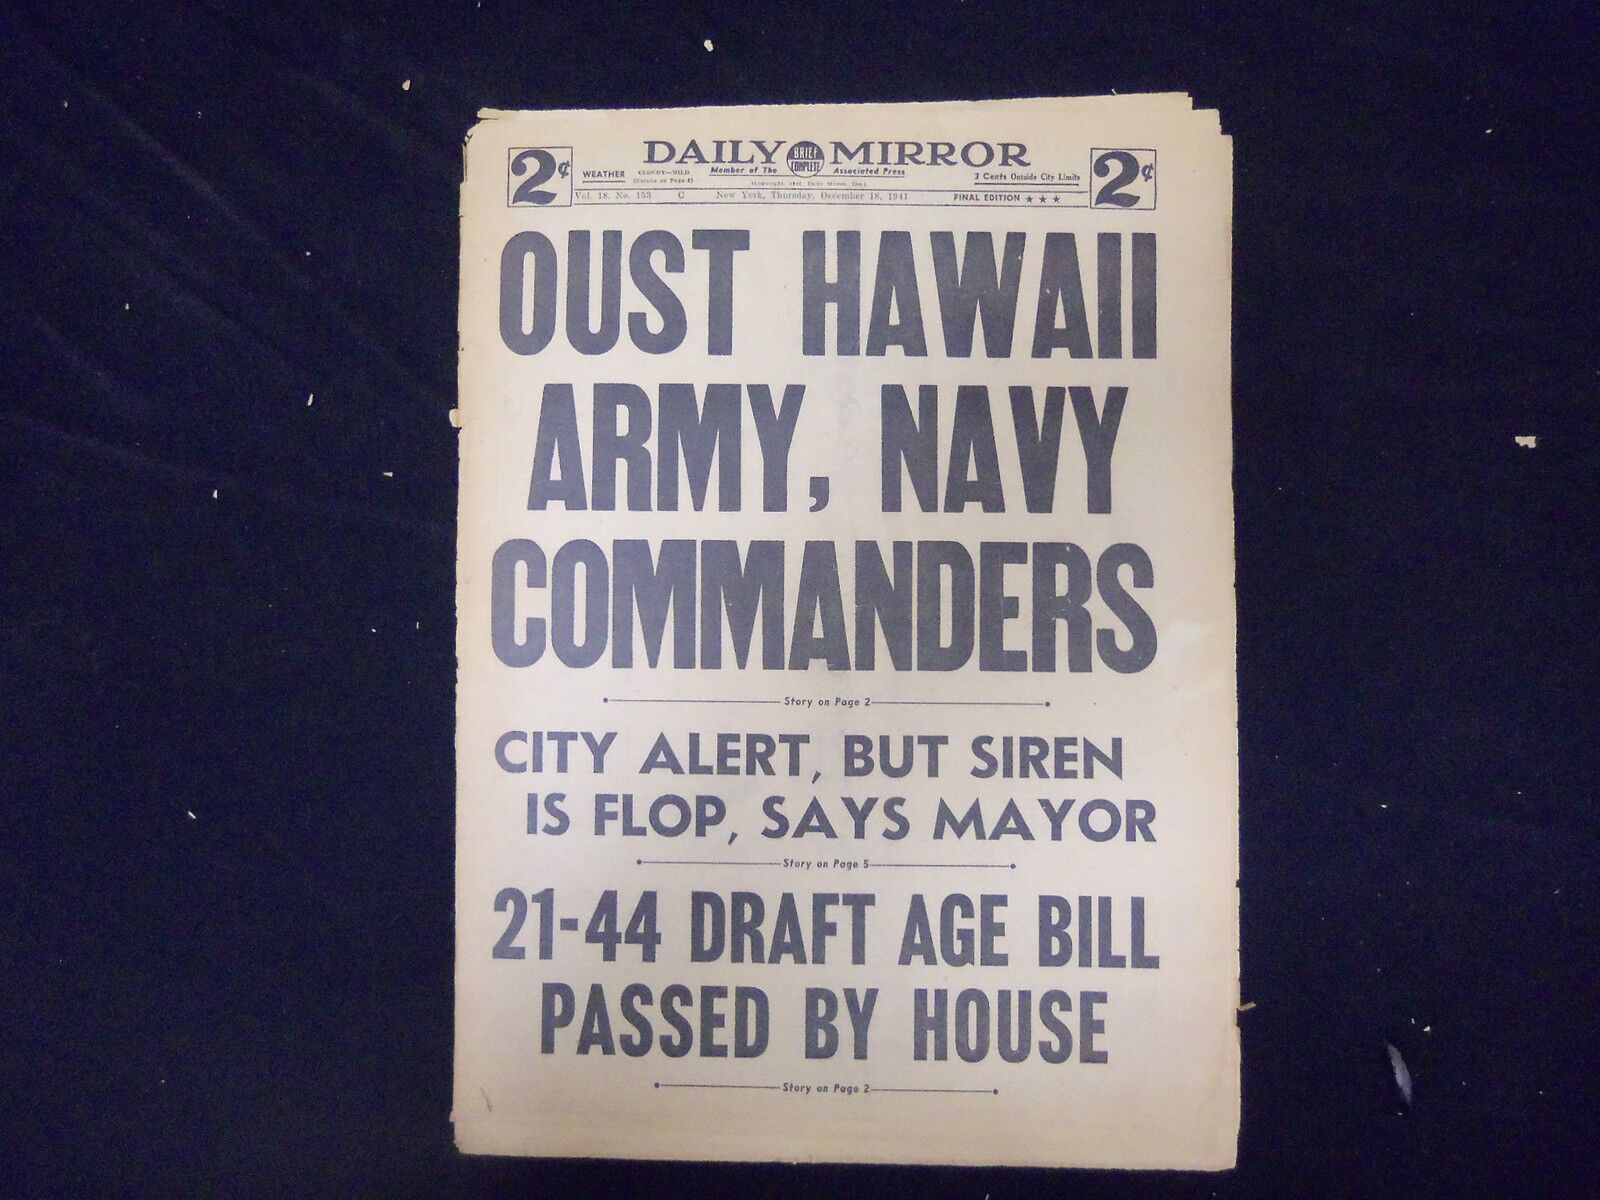 1941 DEC 18 NEW YORK DAILY MIRROR - OUST HAWAII ARMY, NAVY COMMANDERS - NP 2143